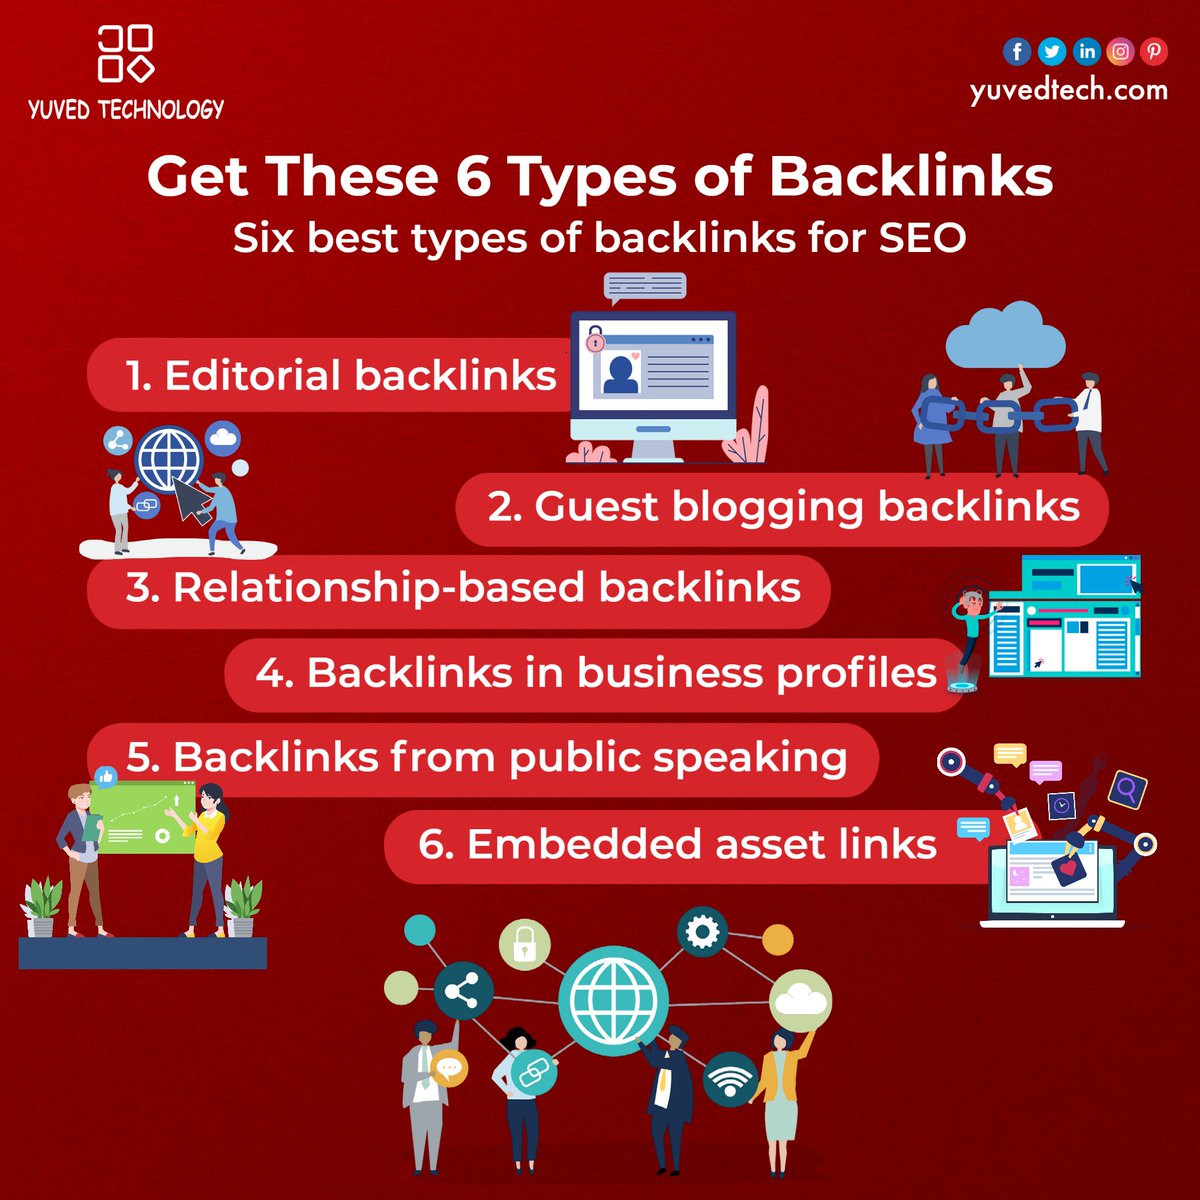 Looking to boost your SEO? 

Check out these 6 backlinks you should be leveraging! 

#SEO #Backlinks #MarketingTips #boostsales #backlinkstrategy #backlinksforseo #yuvedtechnology